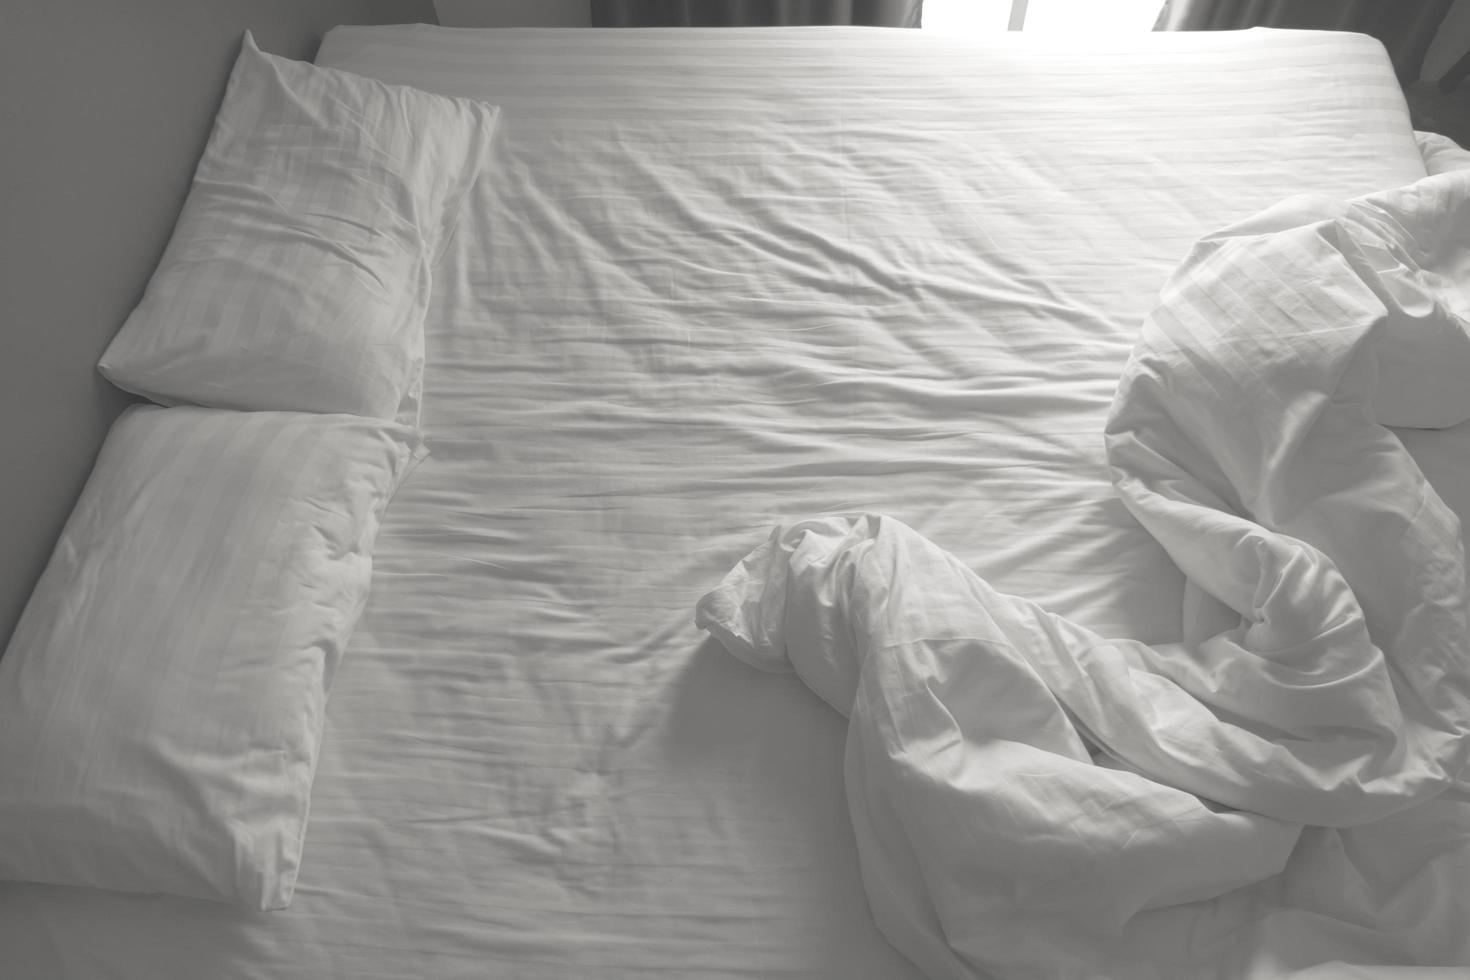 Messy white bedding sheets and pillows. black and white tone photo